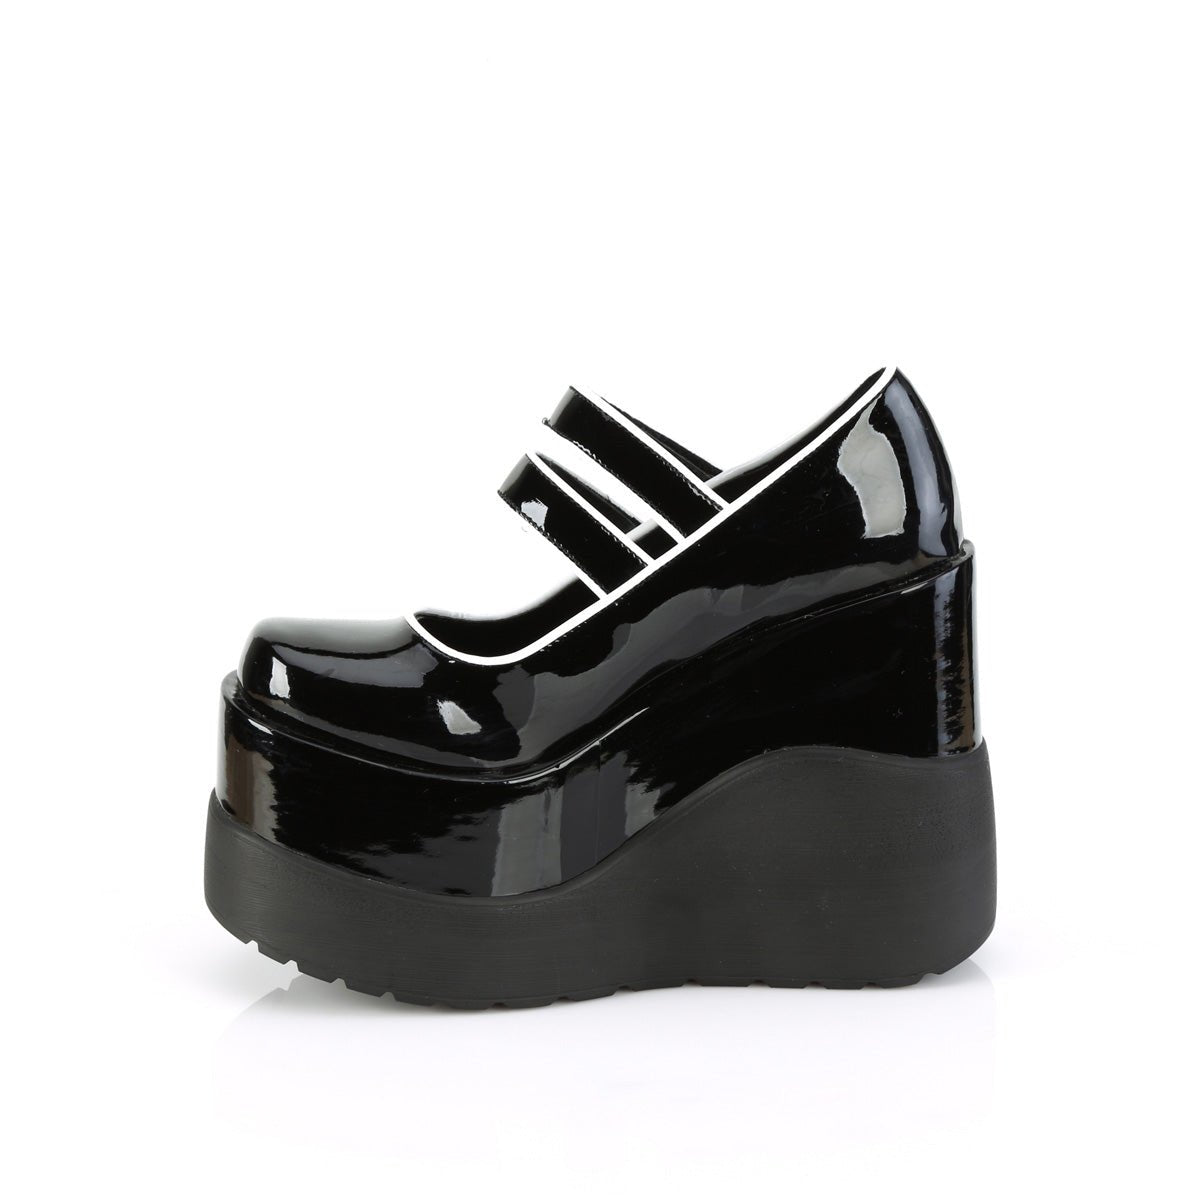 Too Fast | Demonia VOID-37 | Black Patent Leather Mary Janes